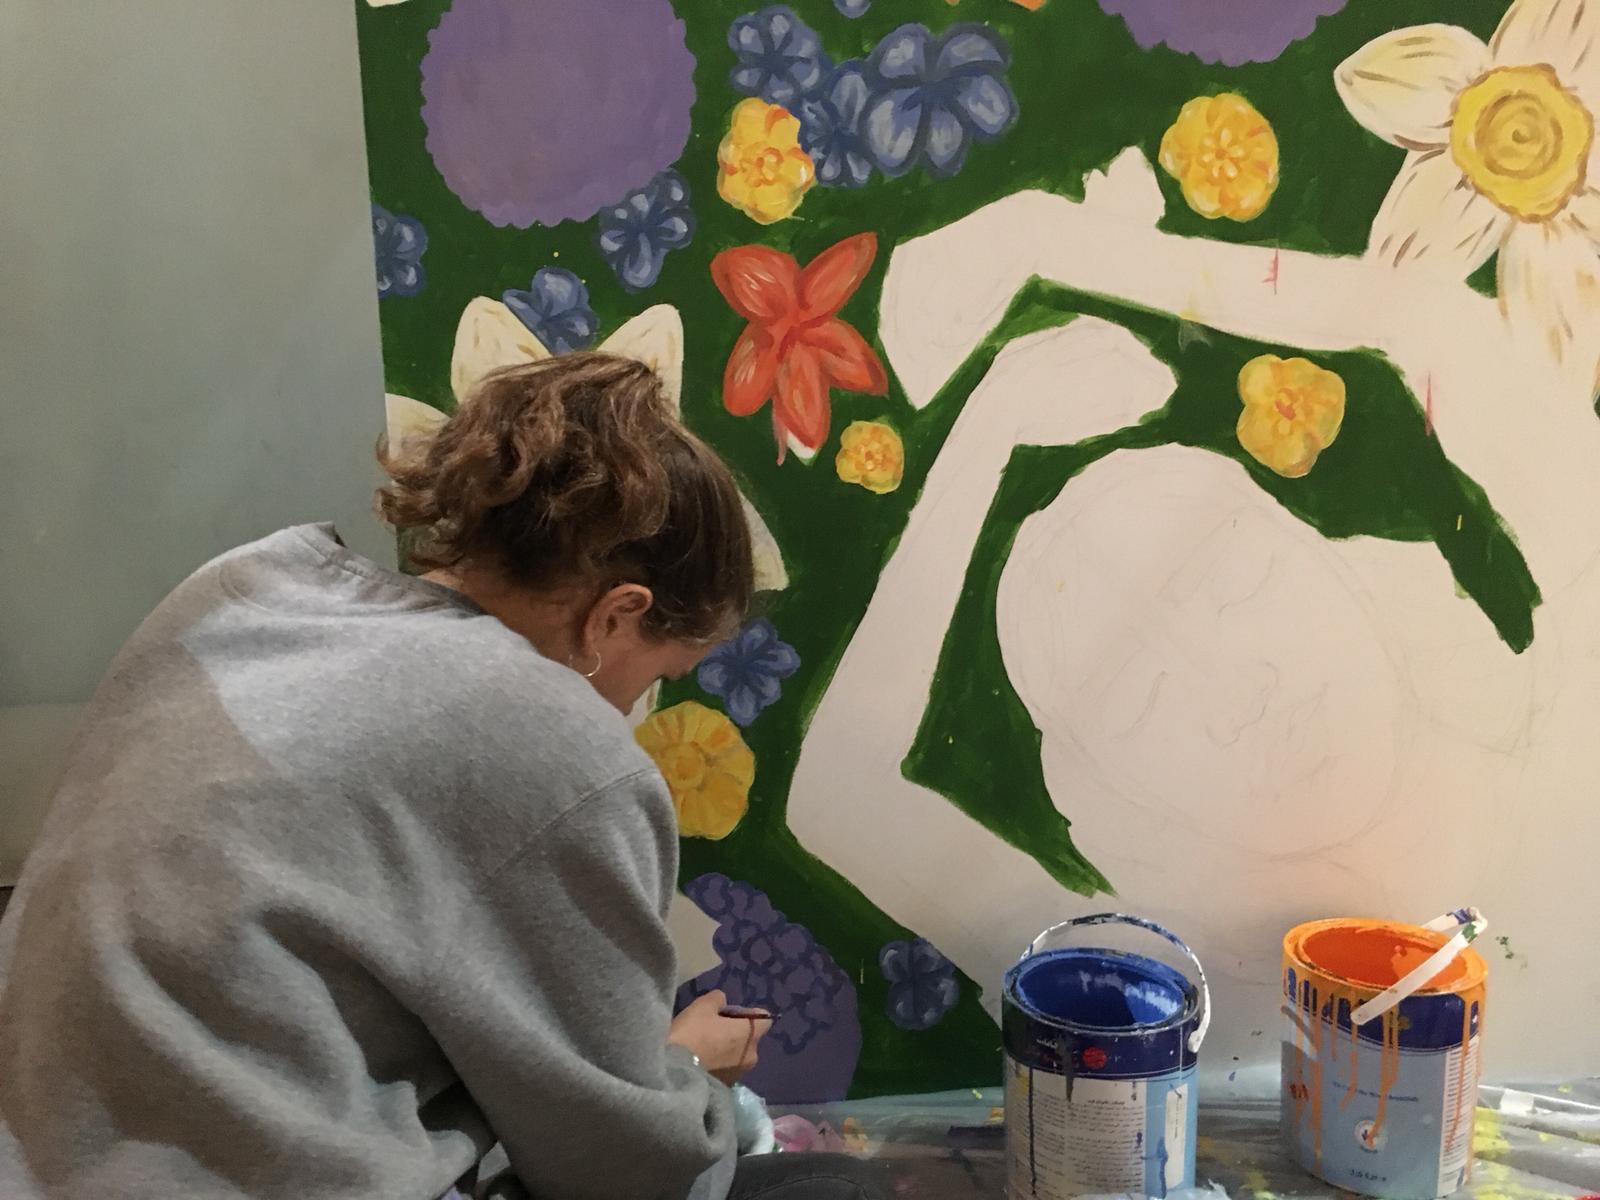 Phoebe sits on the ground, bent over a section of a mural she created at the mall. It depicts a woman laying in a field of flowers, her arms stretched above her head.